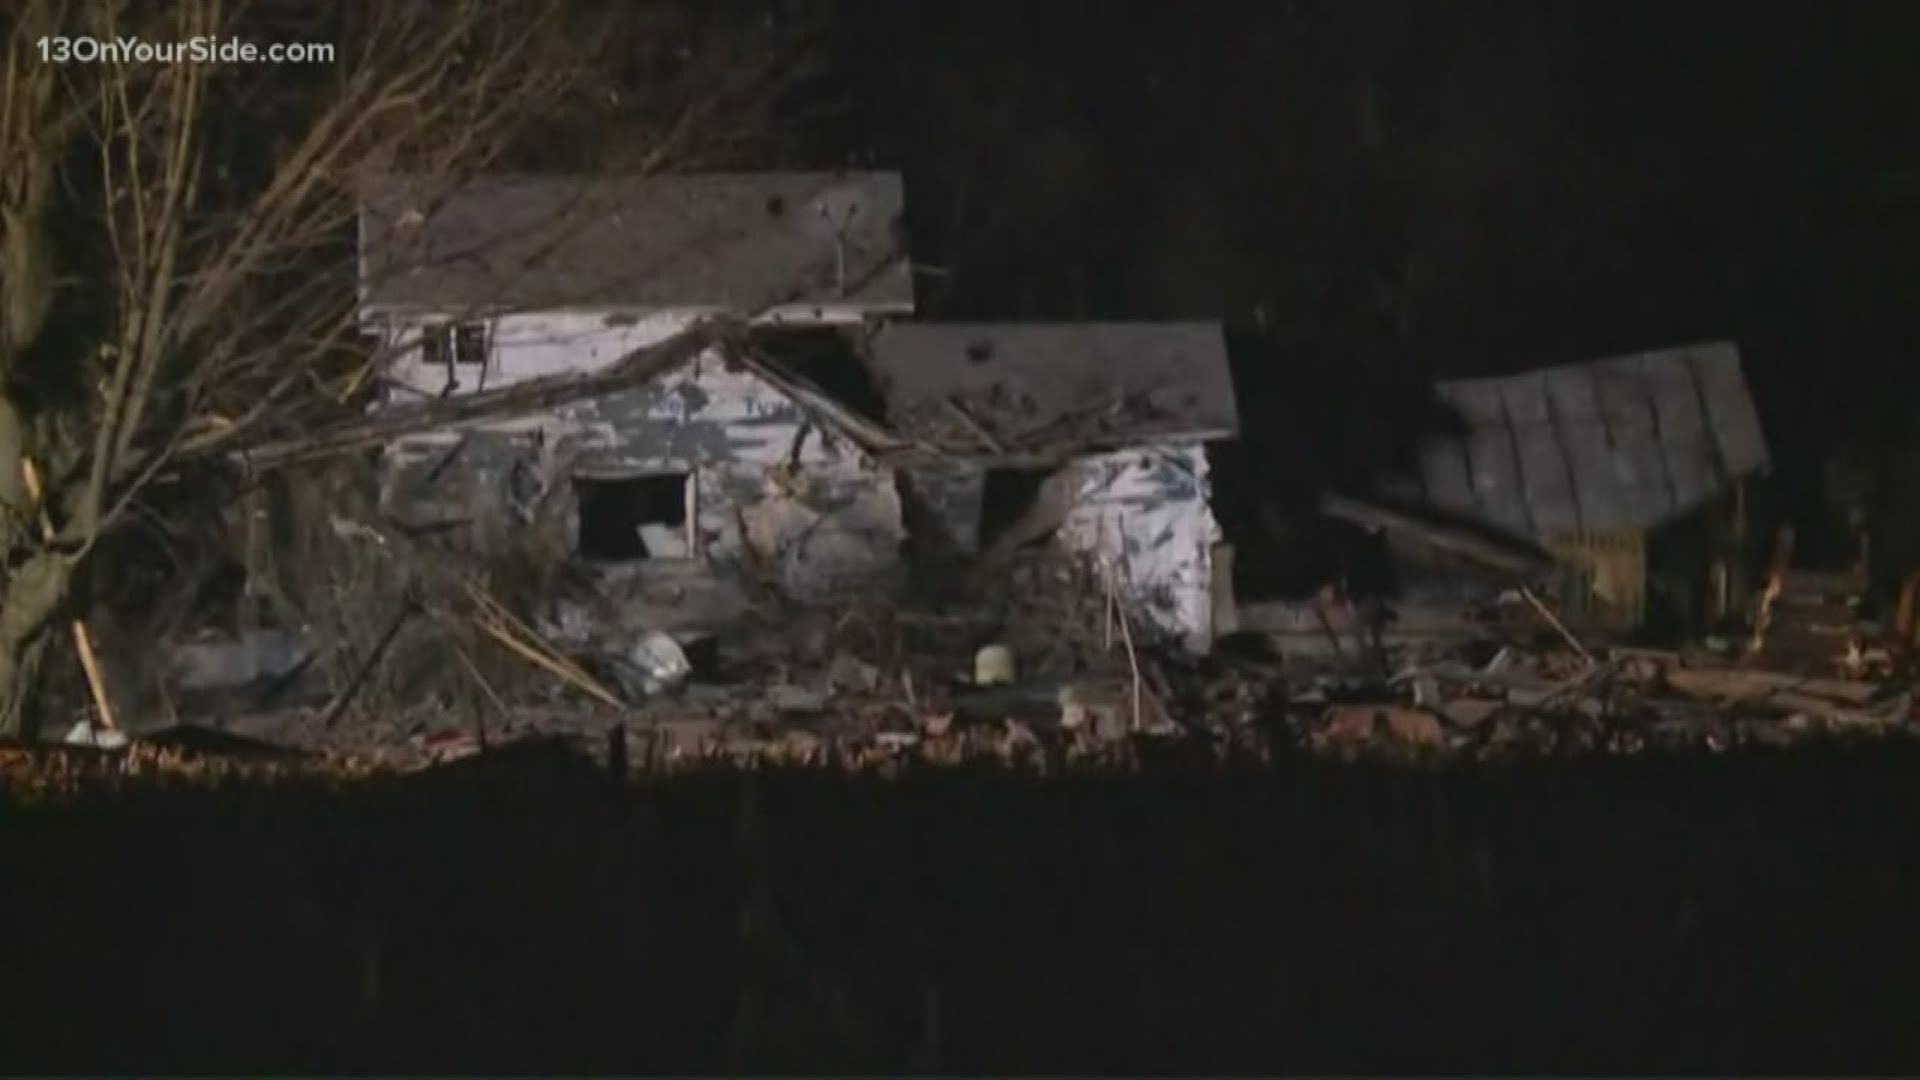 The Kent County Sheriff's Office confirmed the home was vacant.